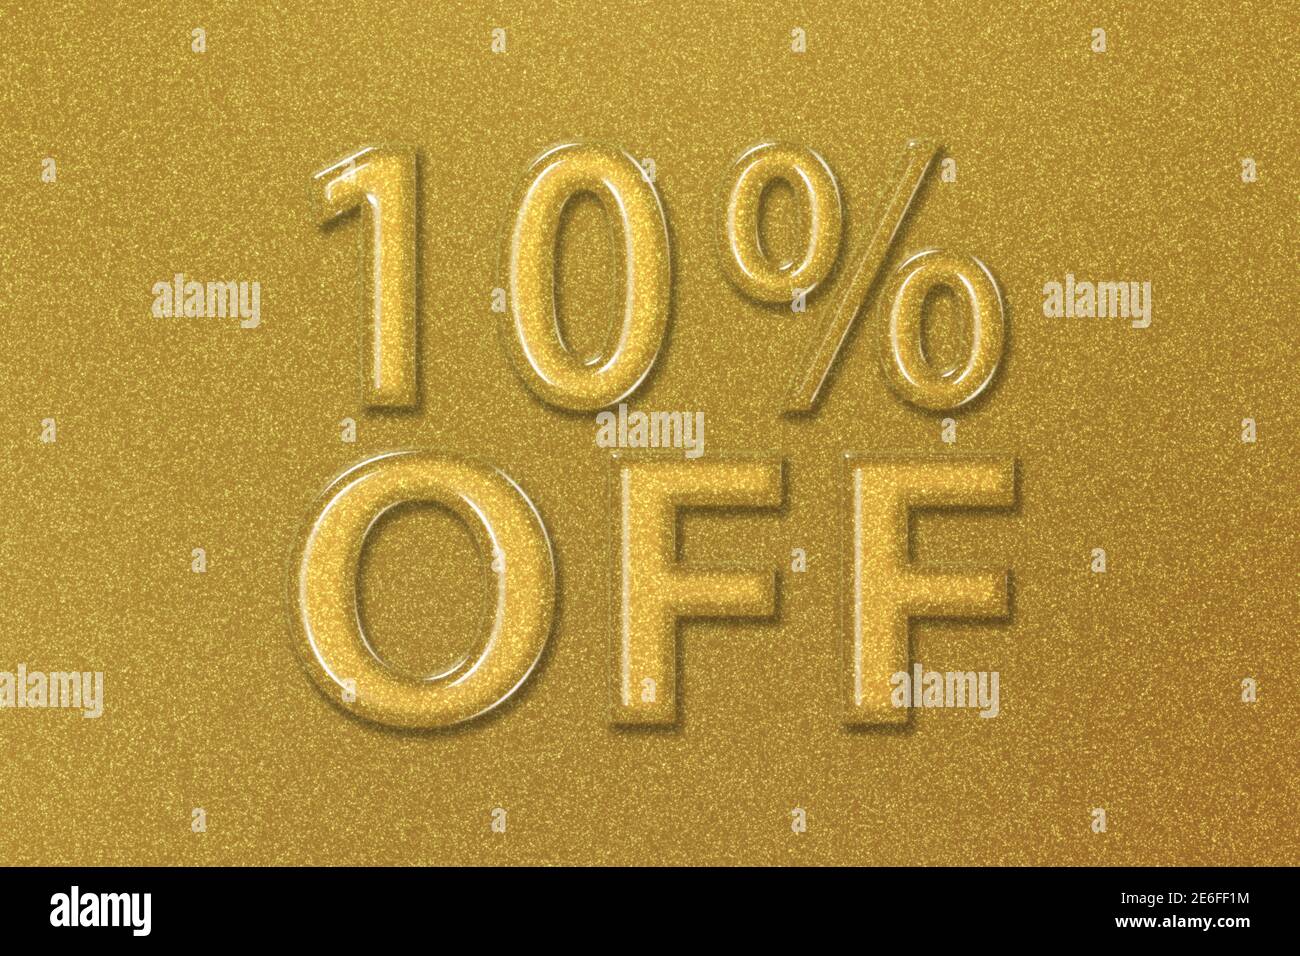 Sale and discount Price off tag, label or badge, 10 percent sale, gold background Stock Photo